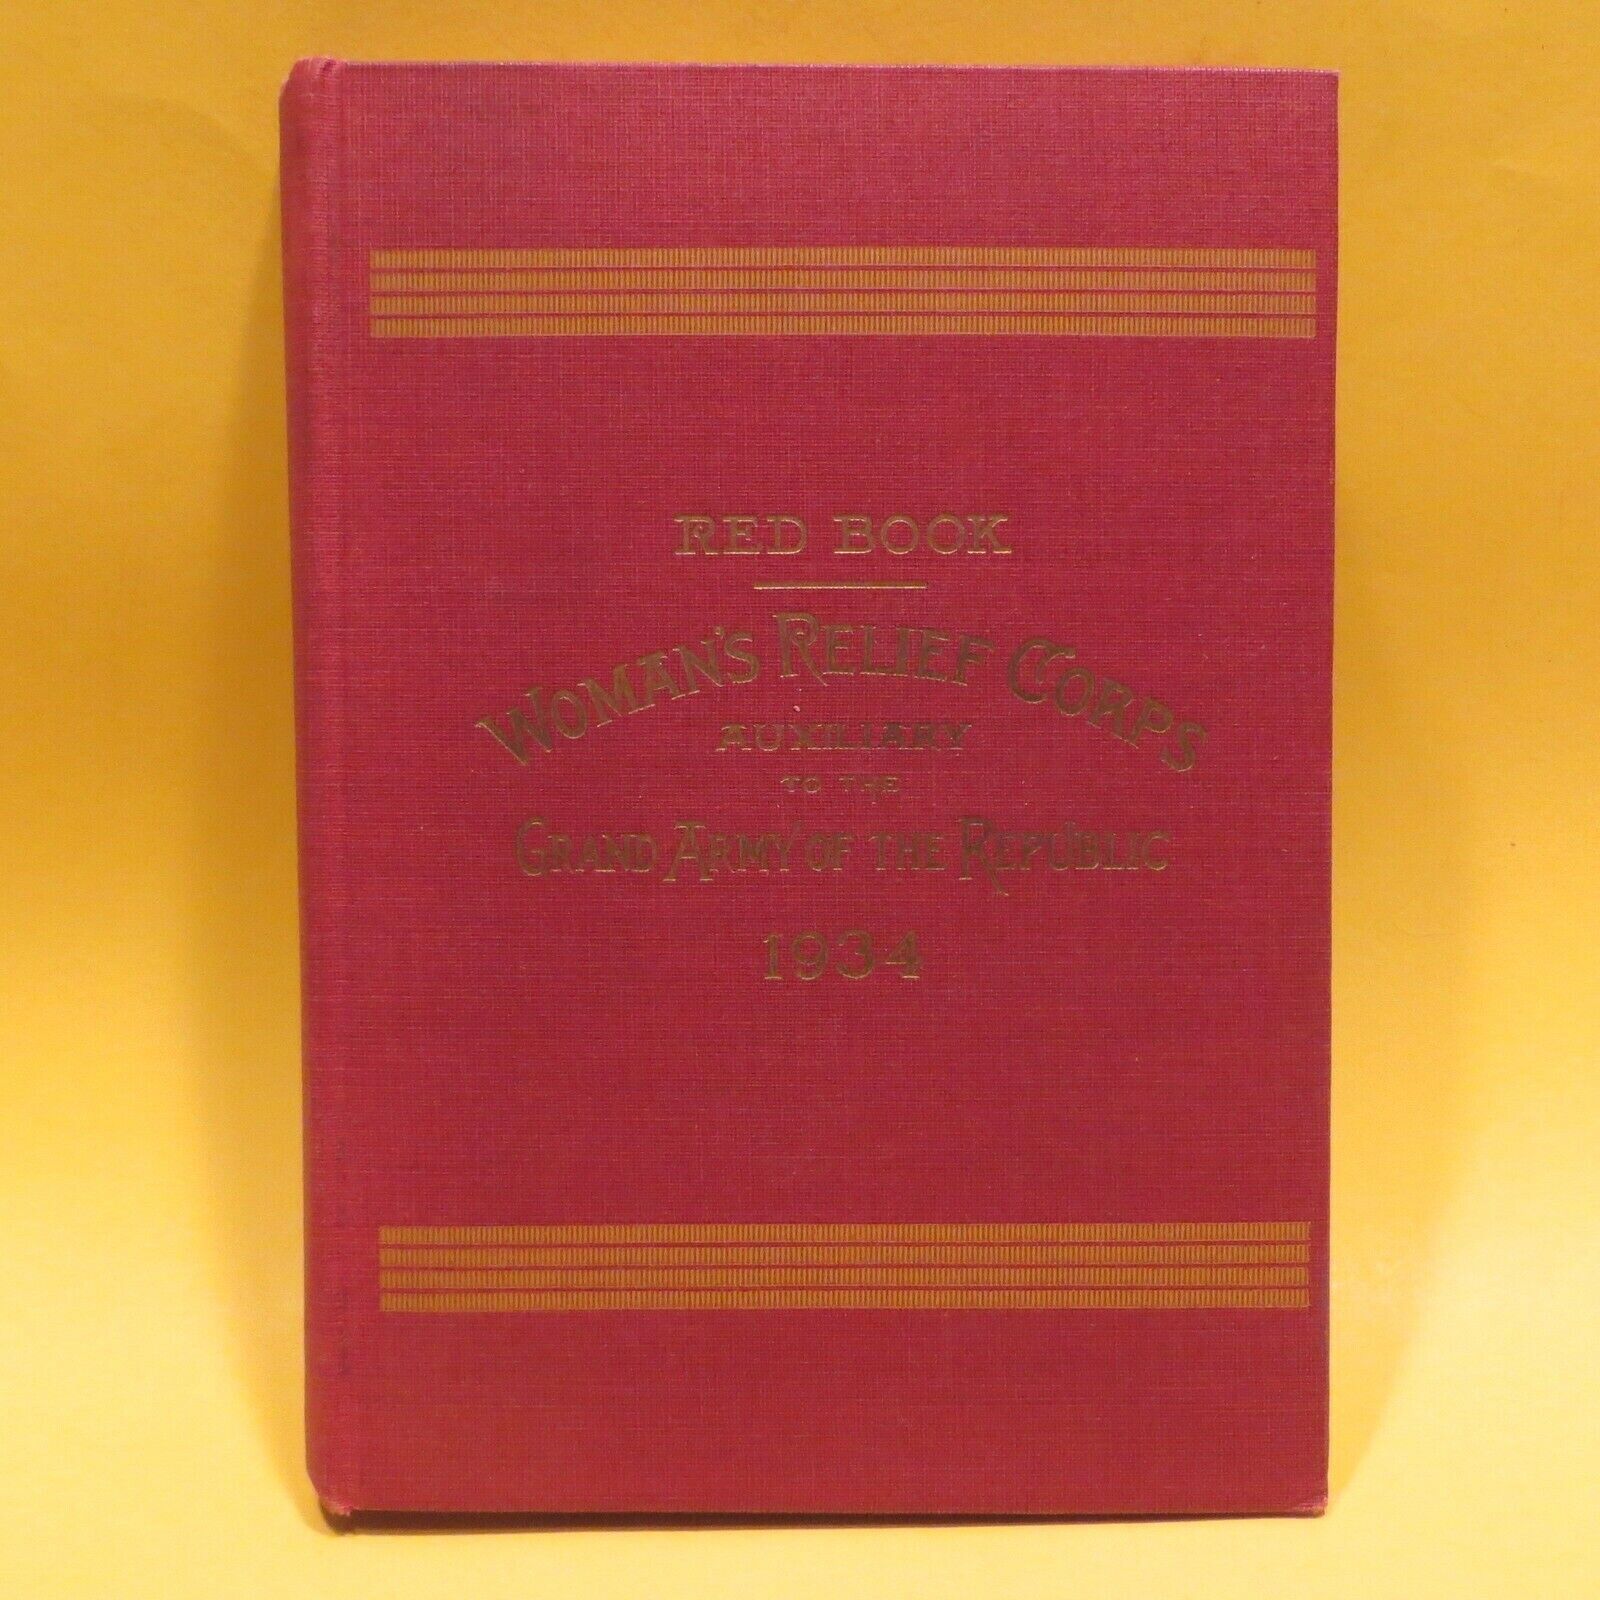 Womans Relief Corps Red Book 1934 Constitution Rules GAR Auxiliary